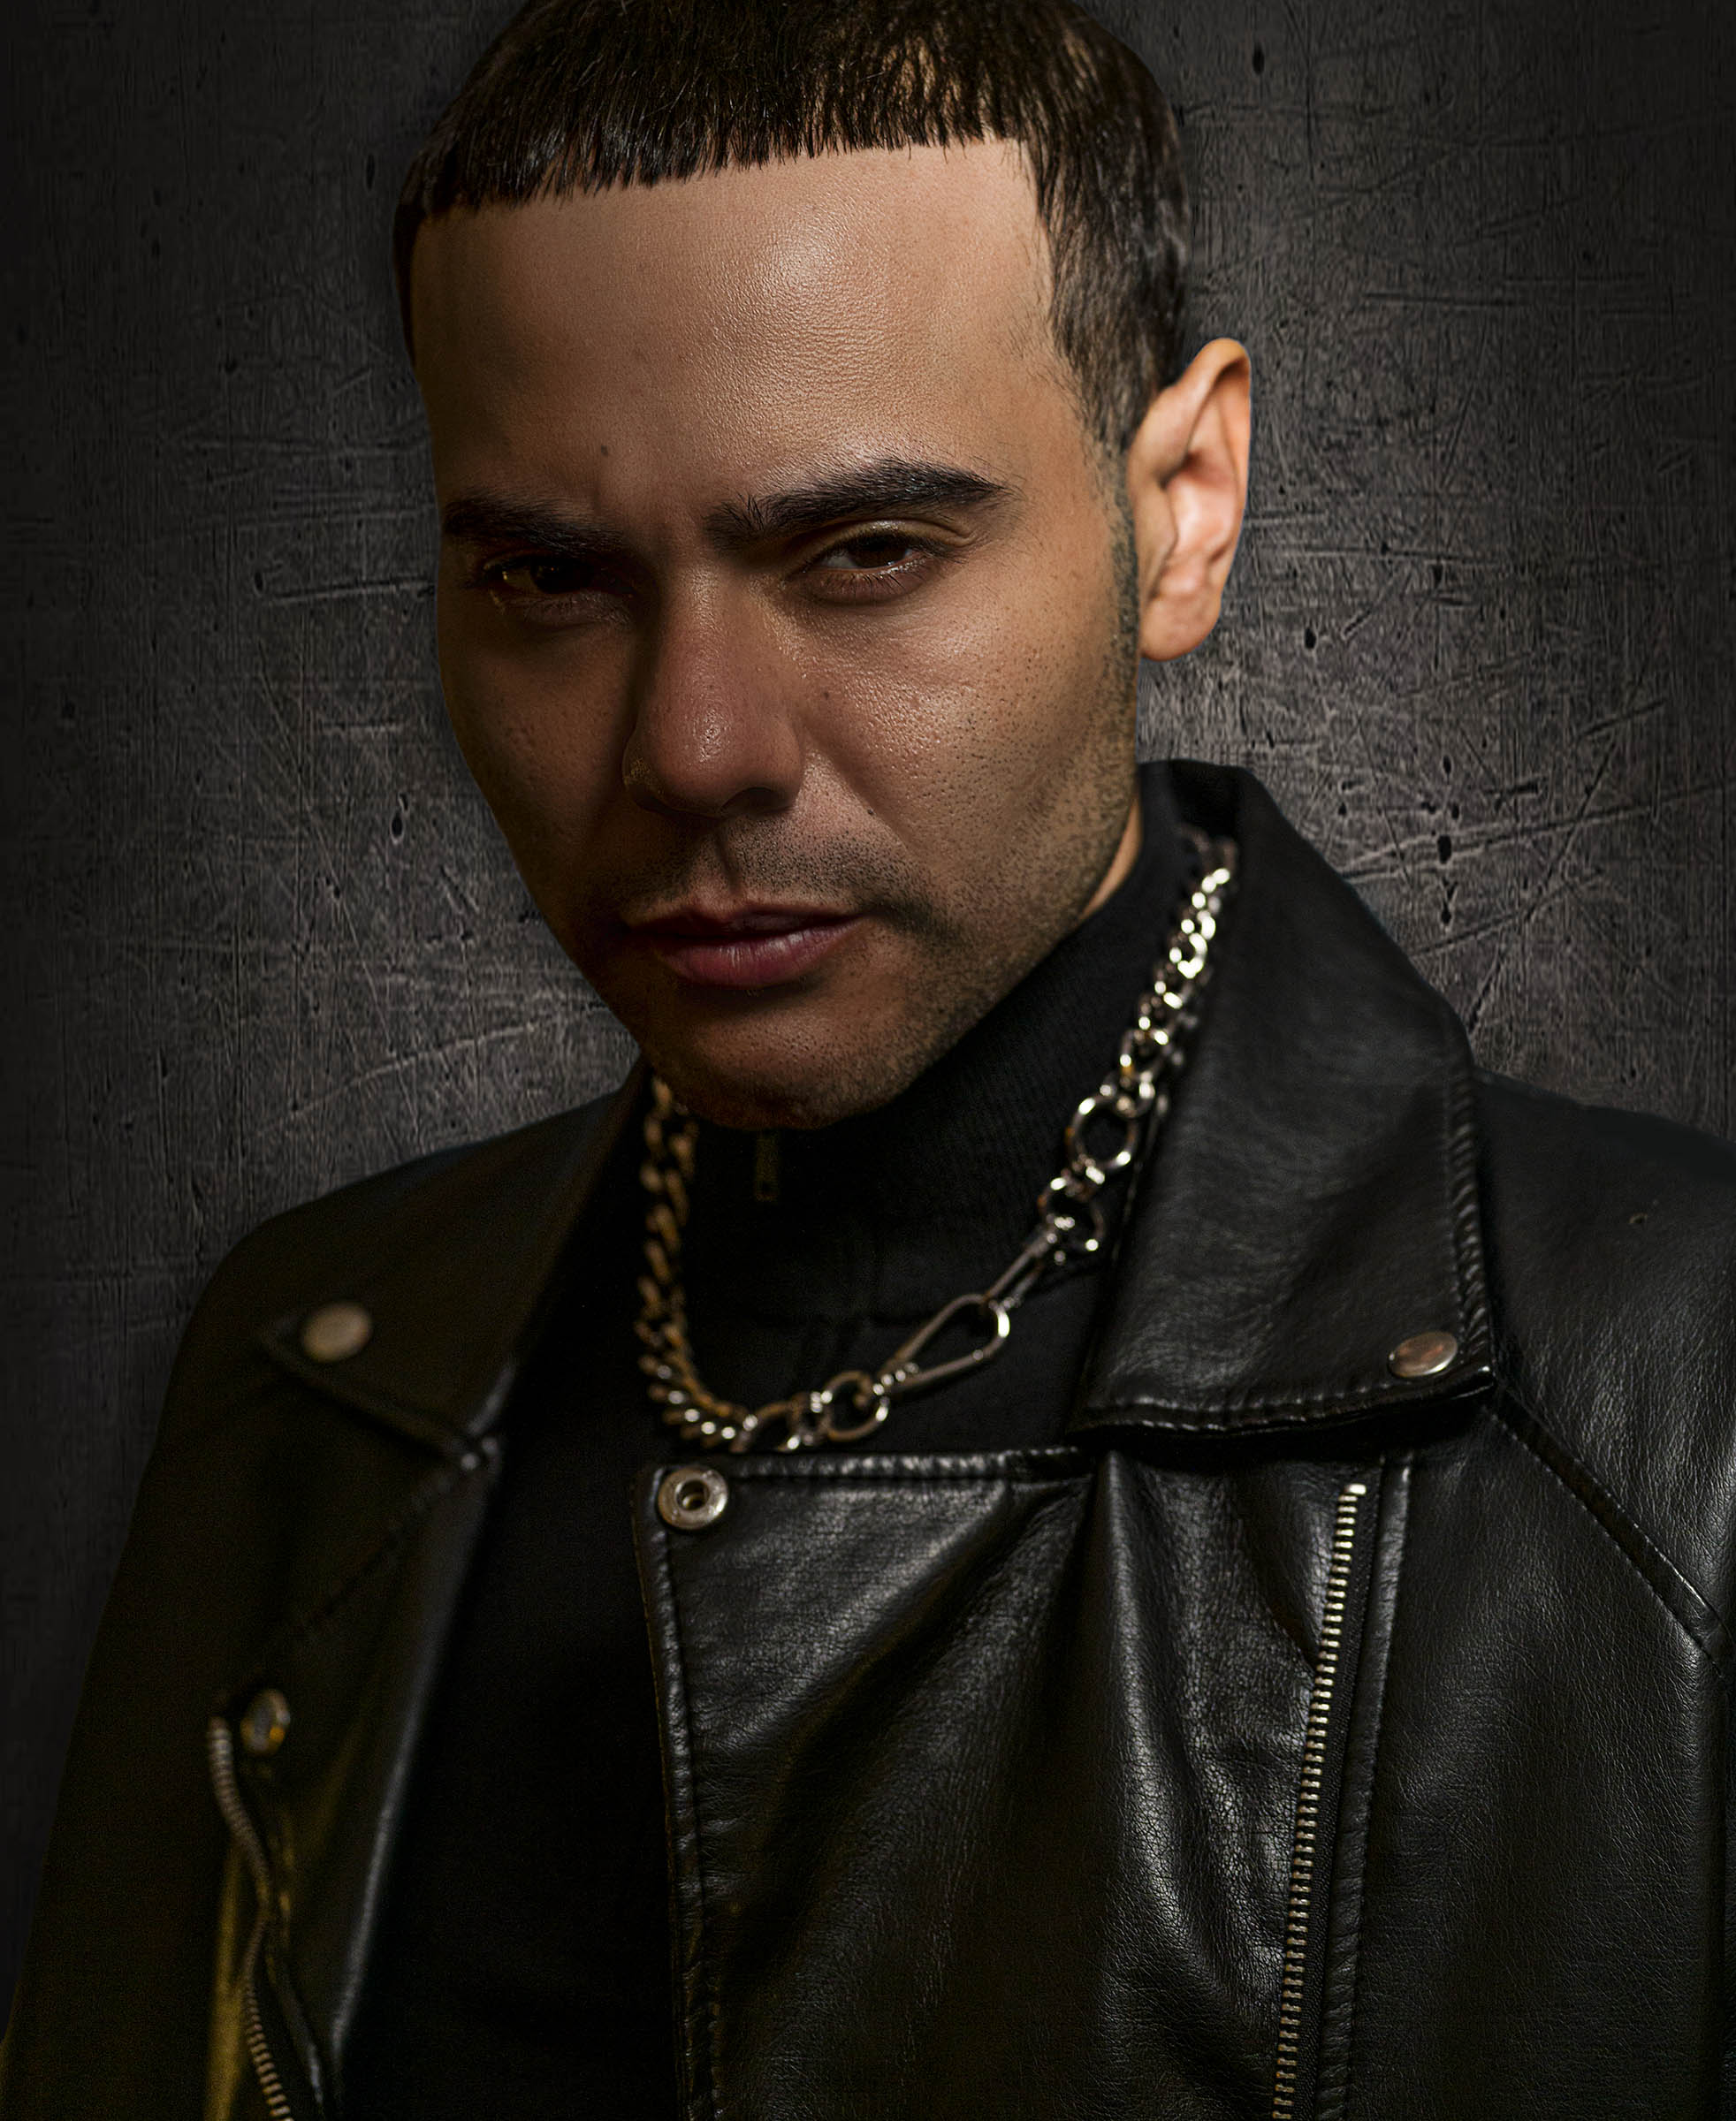 Robbie Santana NYC Rap Film Actor and Social Influencer, Portrait by Wick Beavers the Best Portrait Photographer in NY editorial Magazine Portraits